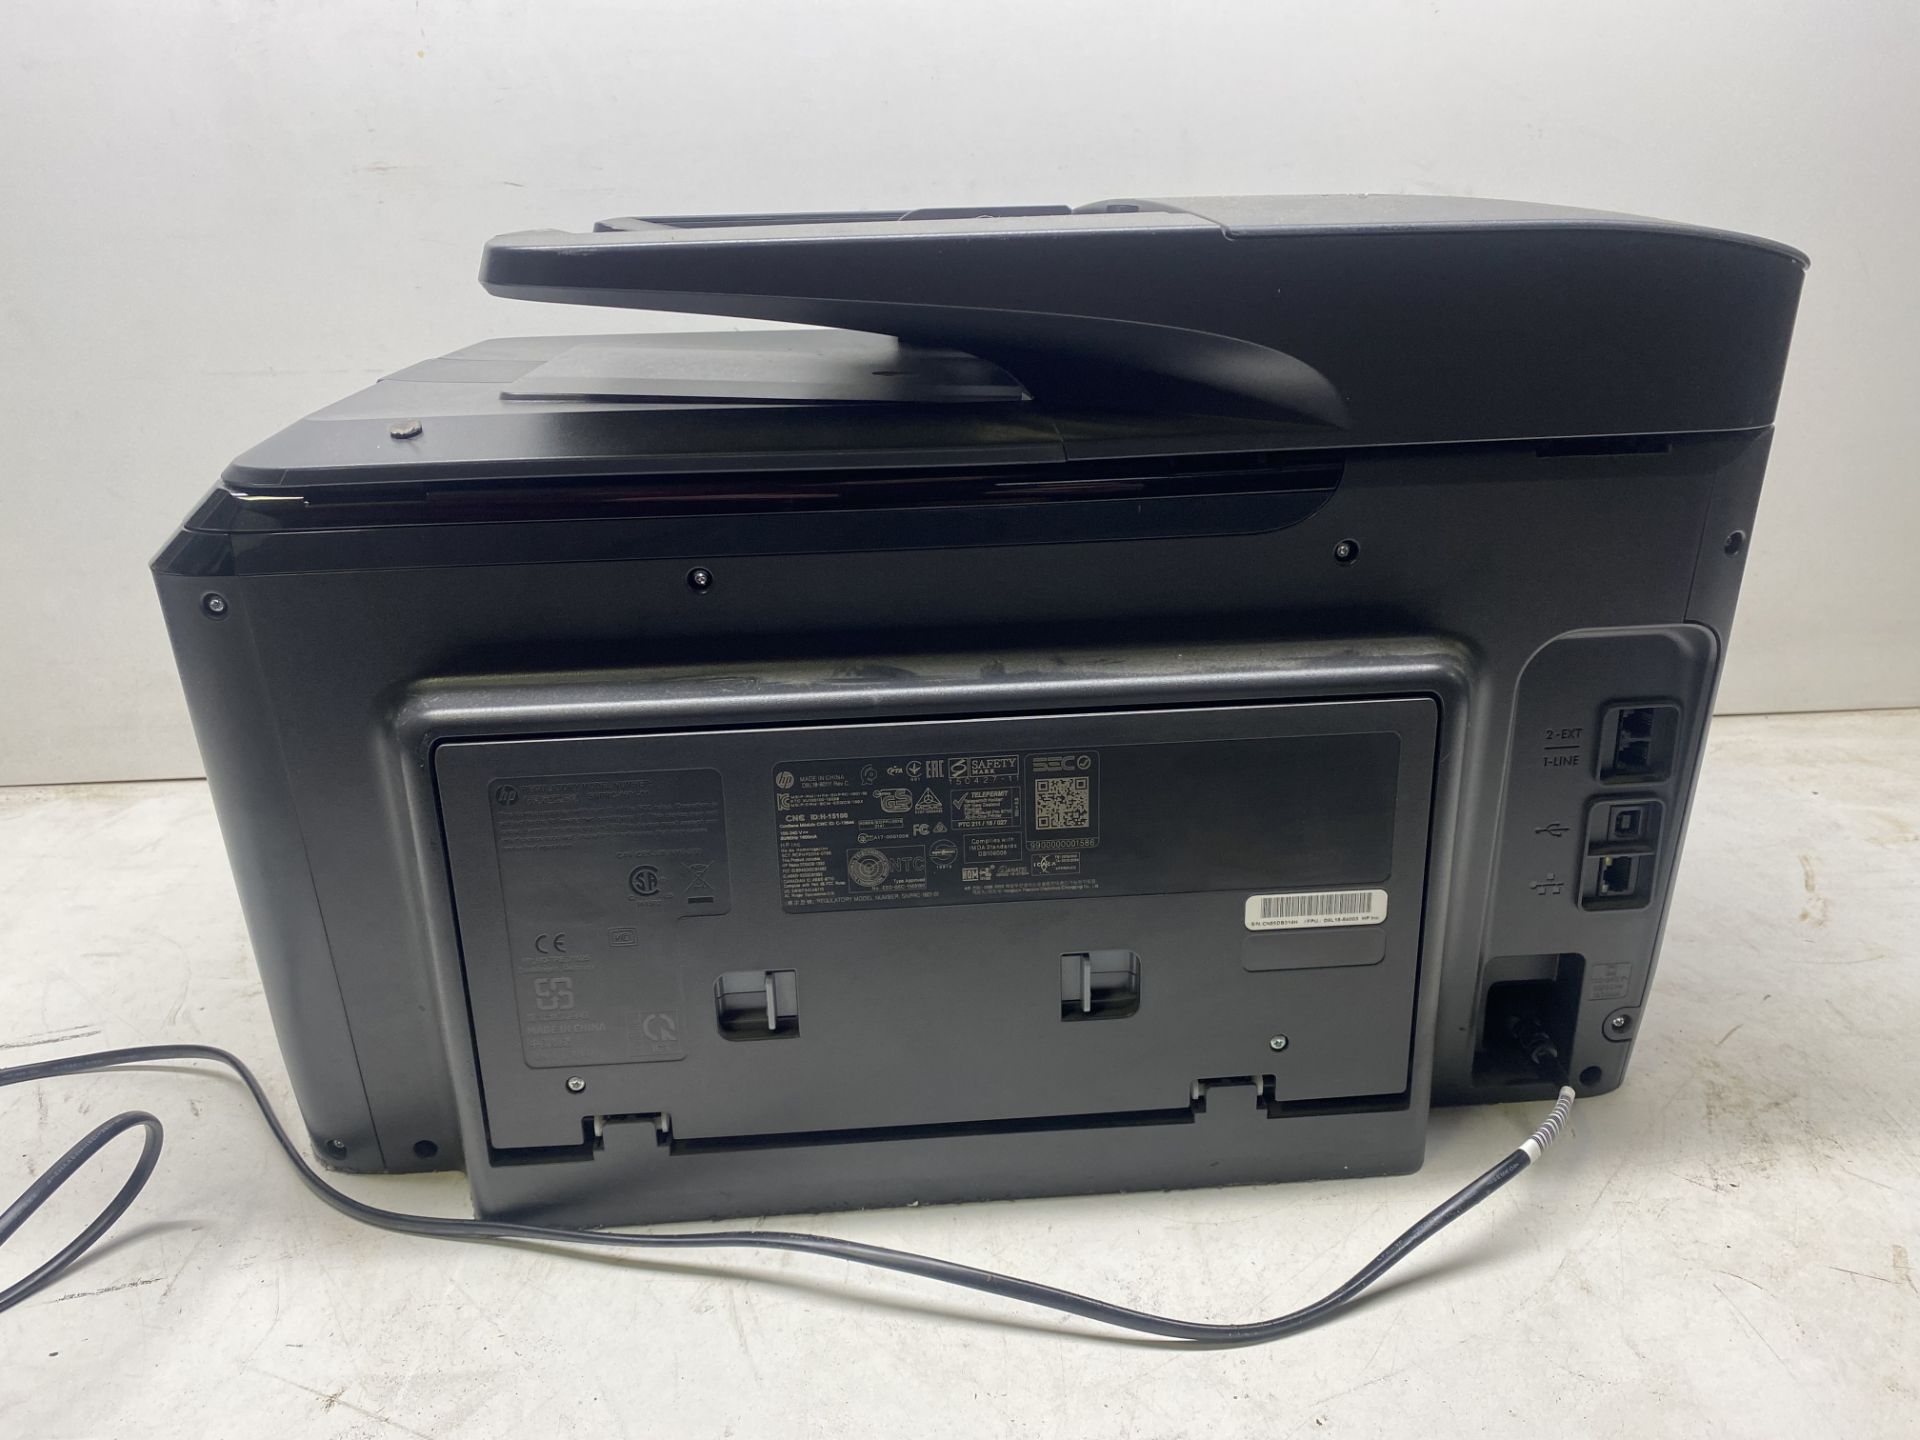 HP OfficeJet Pro 8710 All-in-One Printer - Image 8 of 10